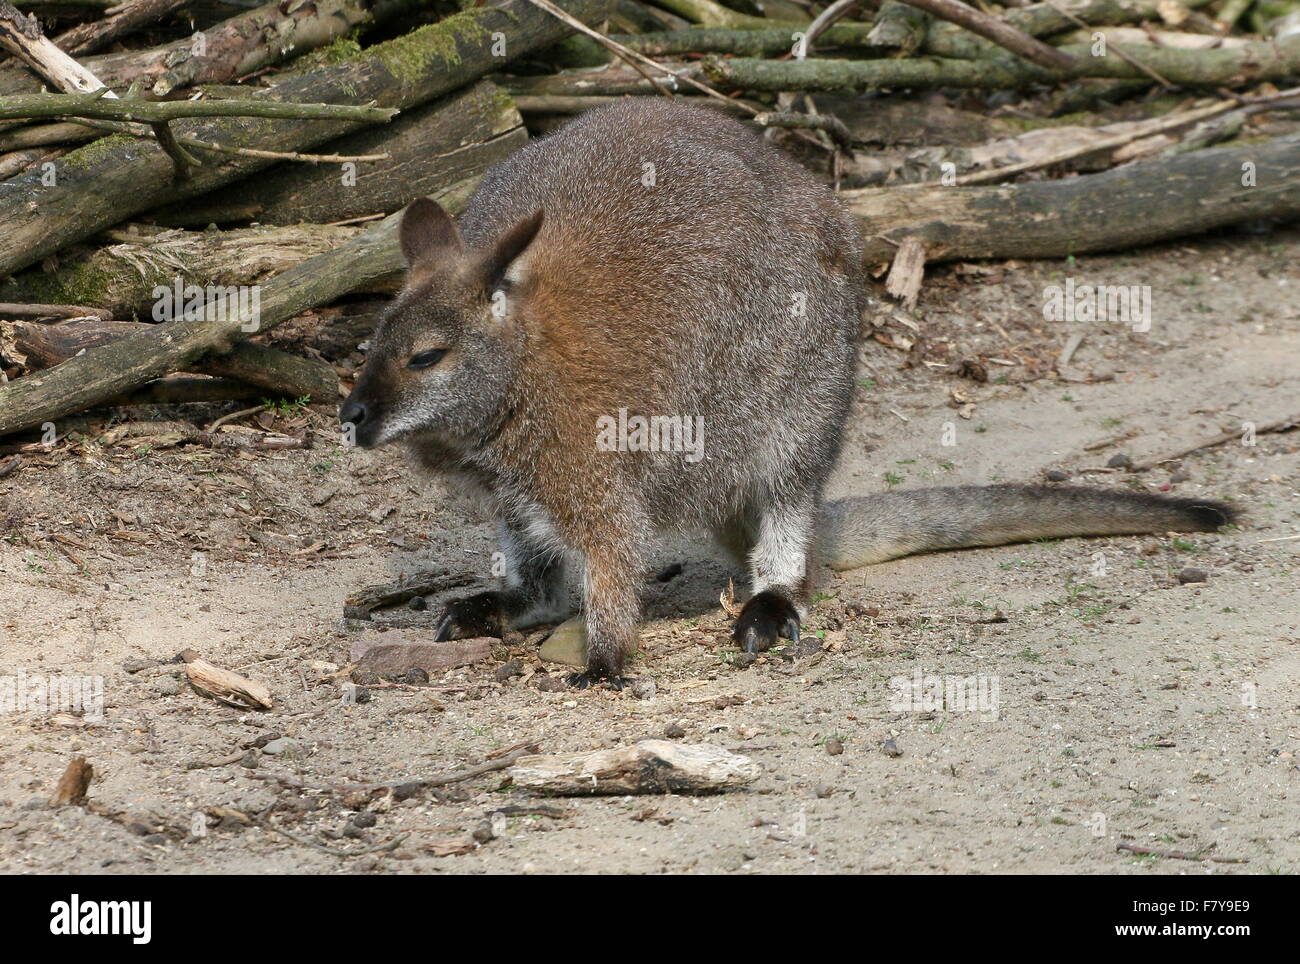 East Australian / Tasmanian Red necked wallaby or Bennett's Wallaby  (Macropus rufogriseus) Stock Photo